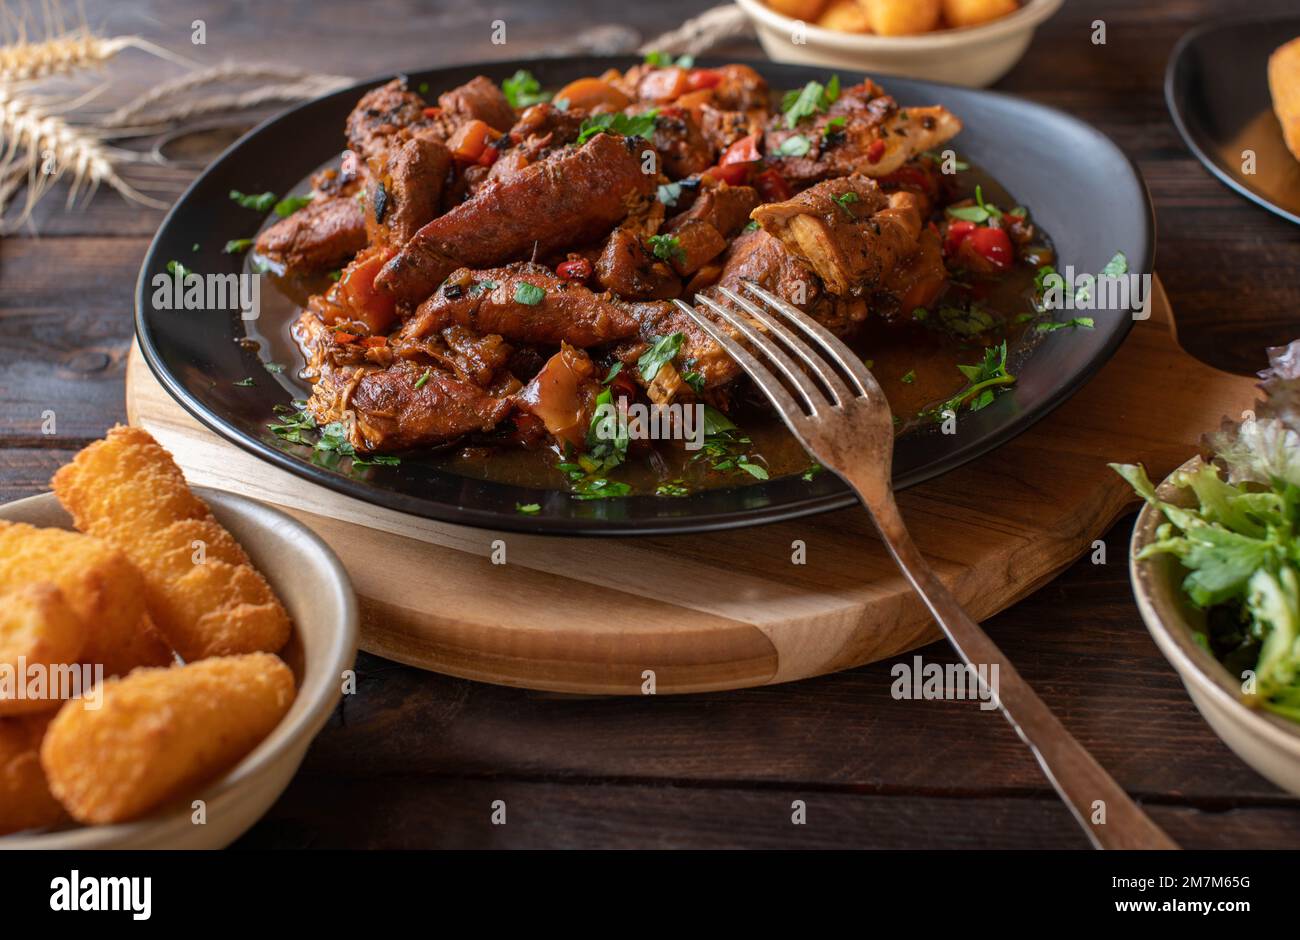 African chicken stew or curry with spicy vegetables on wooden table Stock Photo